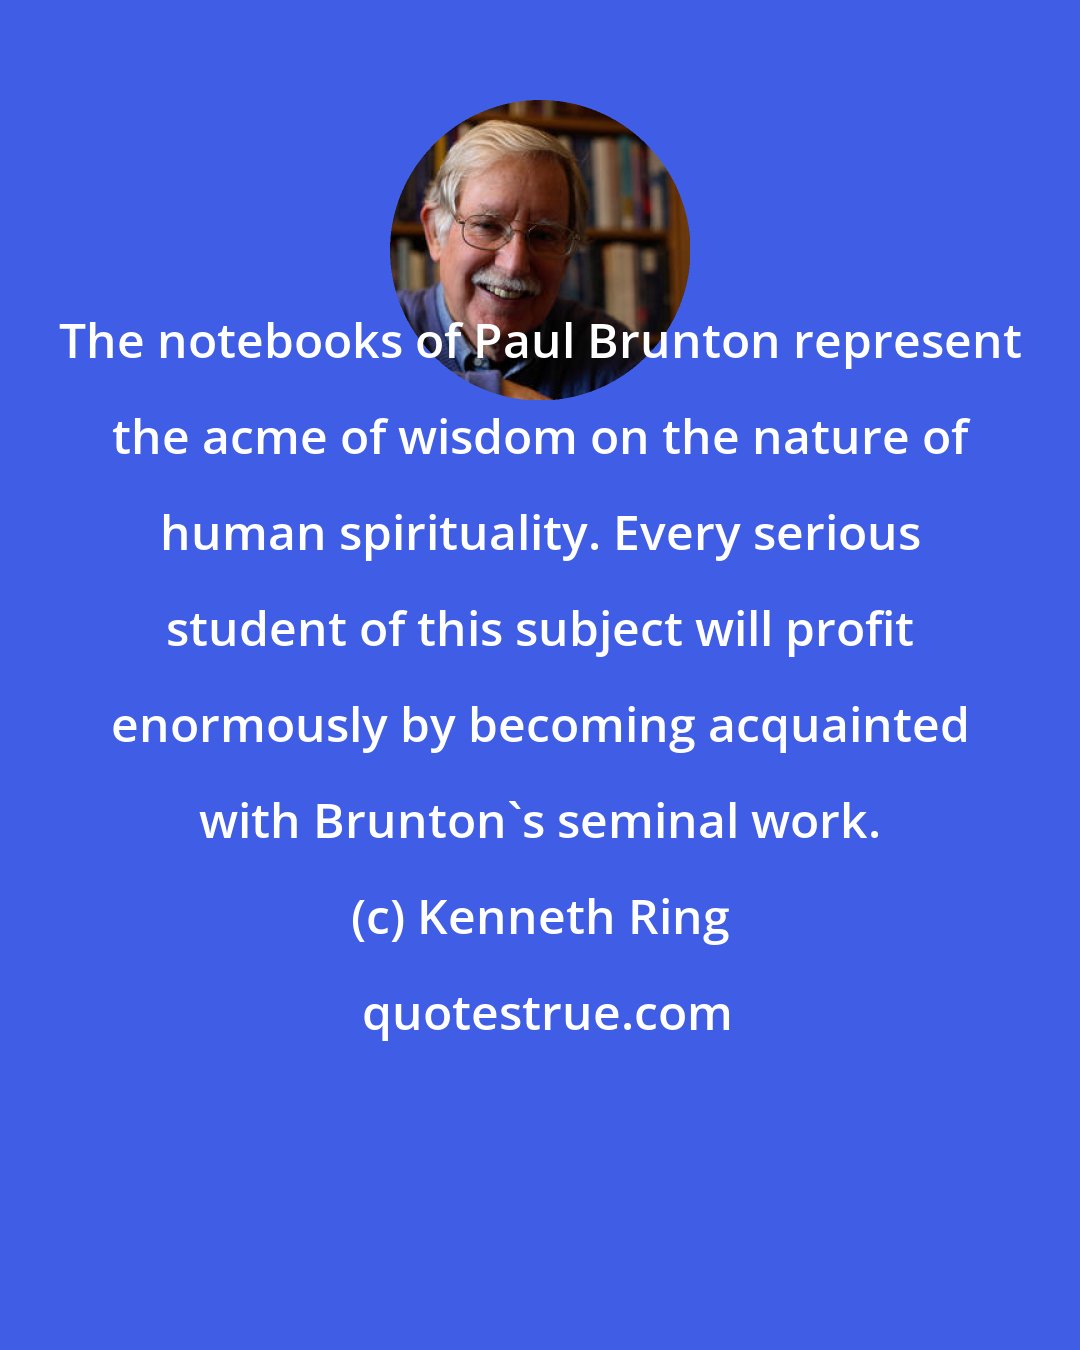 Kenneth Ring: The notebooks of Paul Brunton represent the acme of wisdom on the nature of human spirituality. Every serious student of this subject will profit enormously by becoming acquainted with Brunton's seminal work.